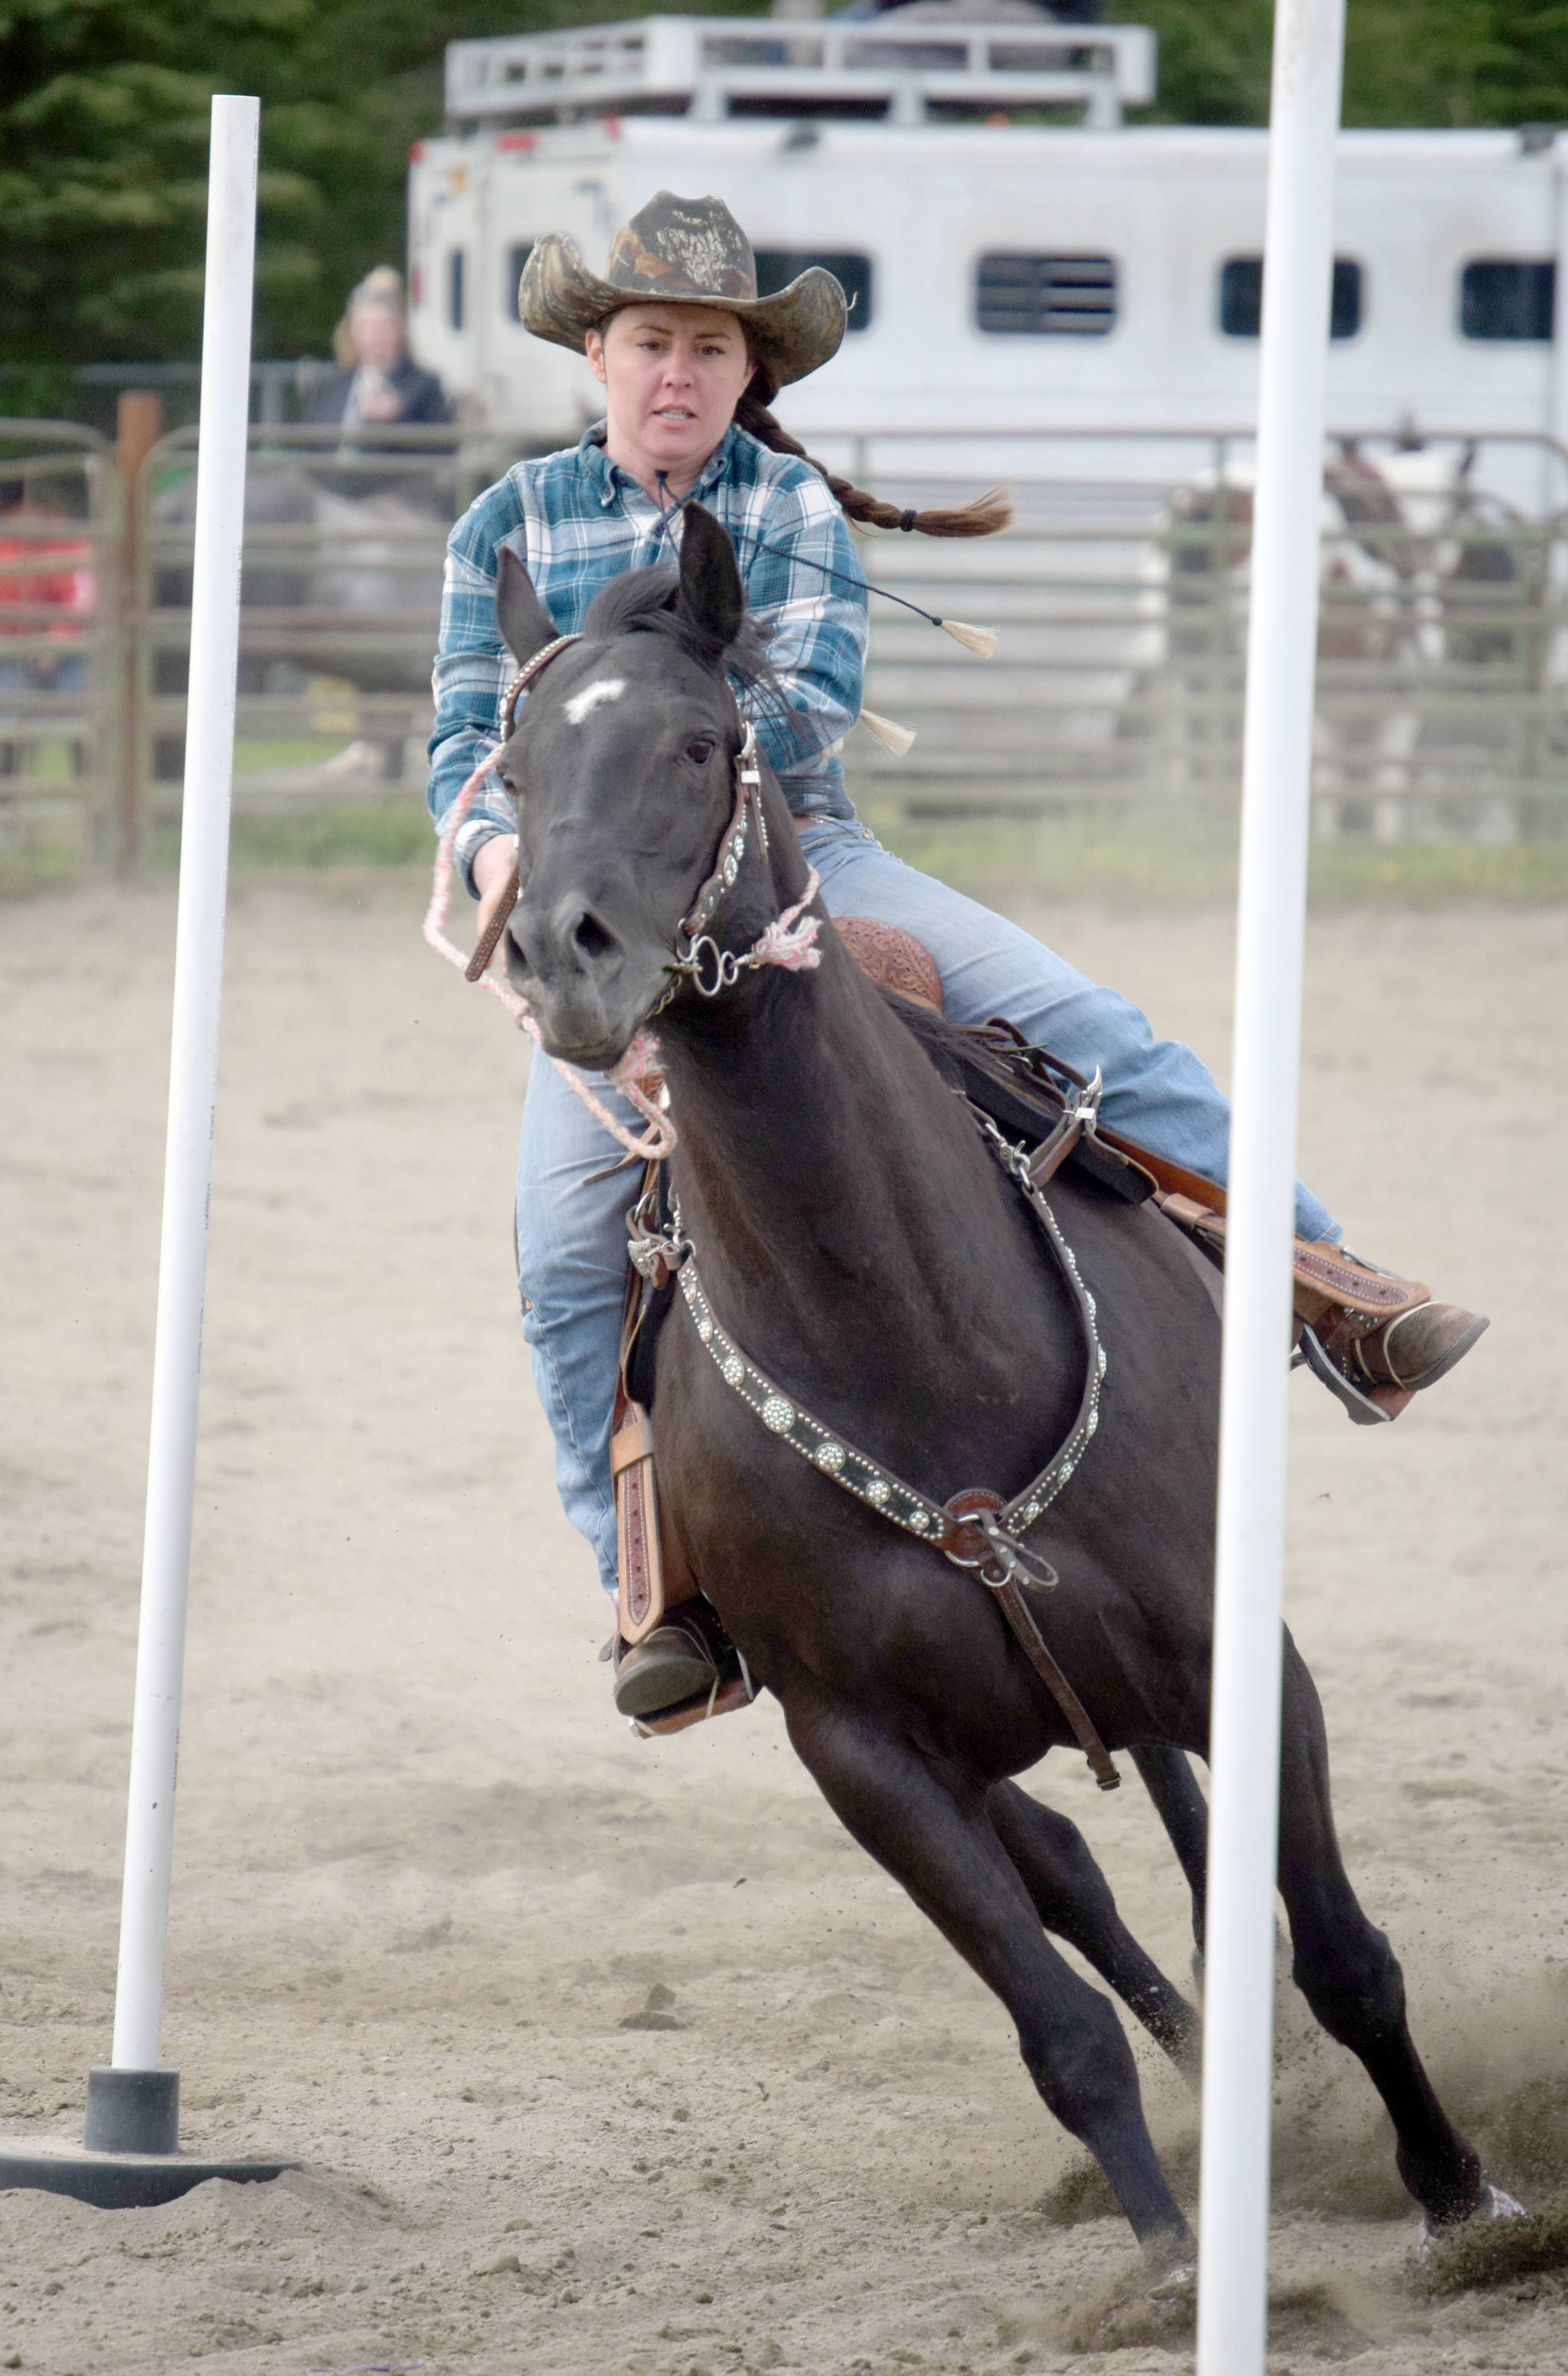 Ciarra McKenzie competes in a jackpot race of the Last Frontier Barrel Racers on Friday, May 31, 2019, at the Soldotna Rodeo Grounds in Soldotna, Alaska. (Photo by Jeff Helminiak/Peninsula Clarion)